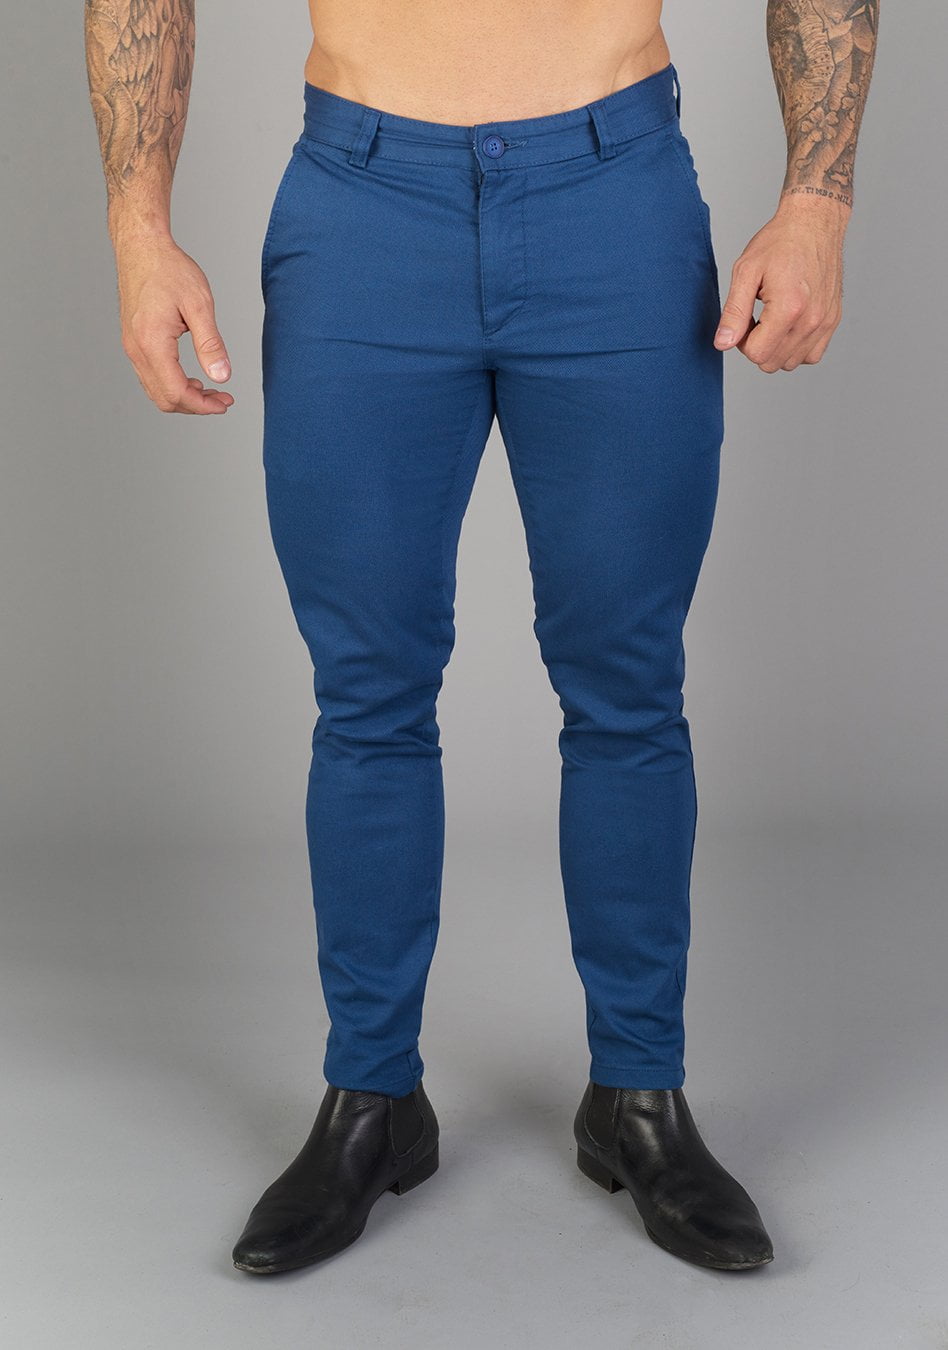 Oxcloth Mid Blue Muscle fit chinos offering a perfect blend of comfort and style for well-built physiques, with a contoured waist and athletic fit design for an on-trend appearance.